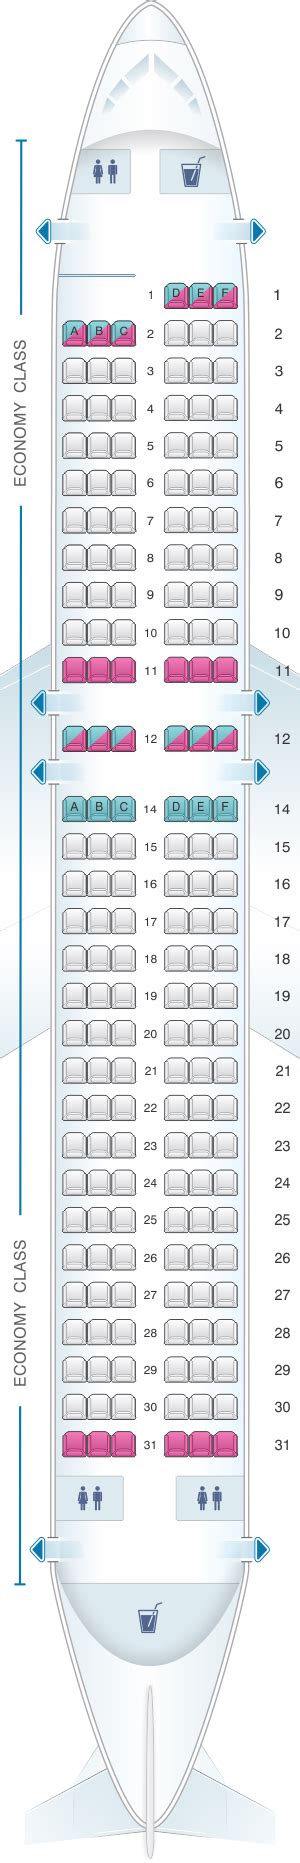 Seat Maps; Allegiant Air Airbus A320 Seat Map; Seat 17d; Allegiant Air Reviews. Seating Charts · Airbus A319 Airbus A320 · Boeing 757-200 · McDonnell Douglas MD-80 . Allegiant Air Airbus A320 Seat Reviews Show seat chart [1] Pro tips: this seat has extra legroom : no under-seat stowage during takeoff and landing :